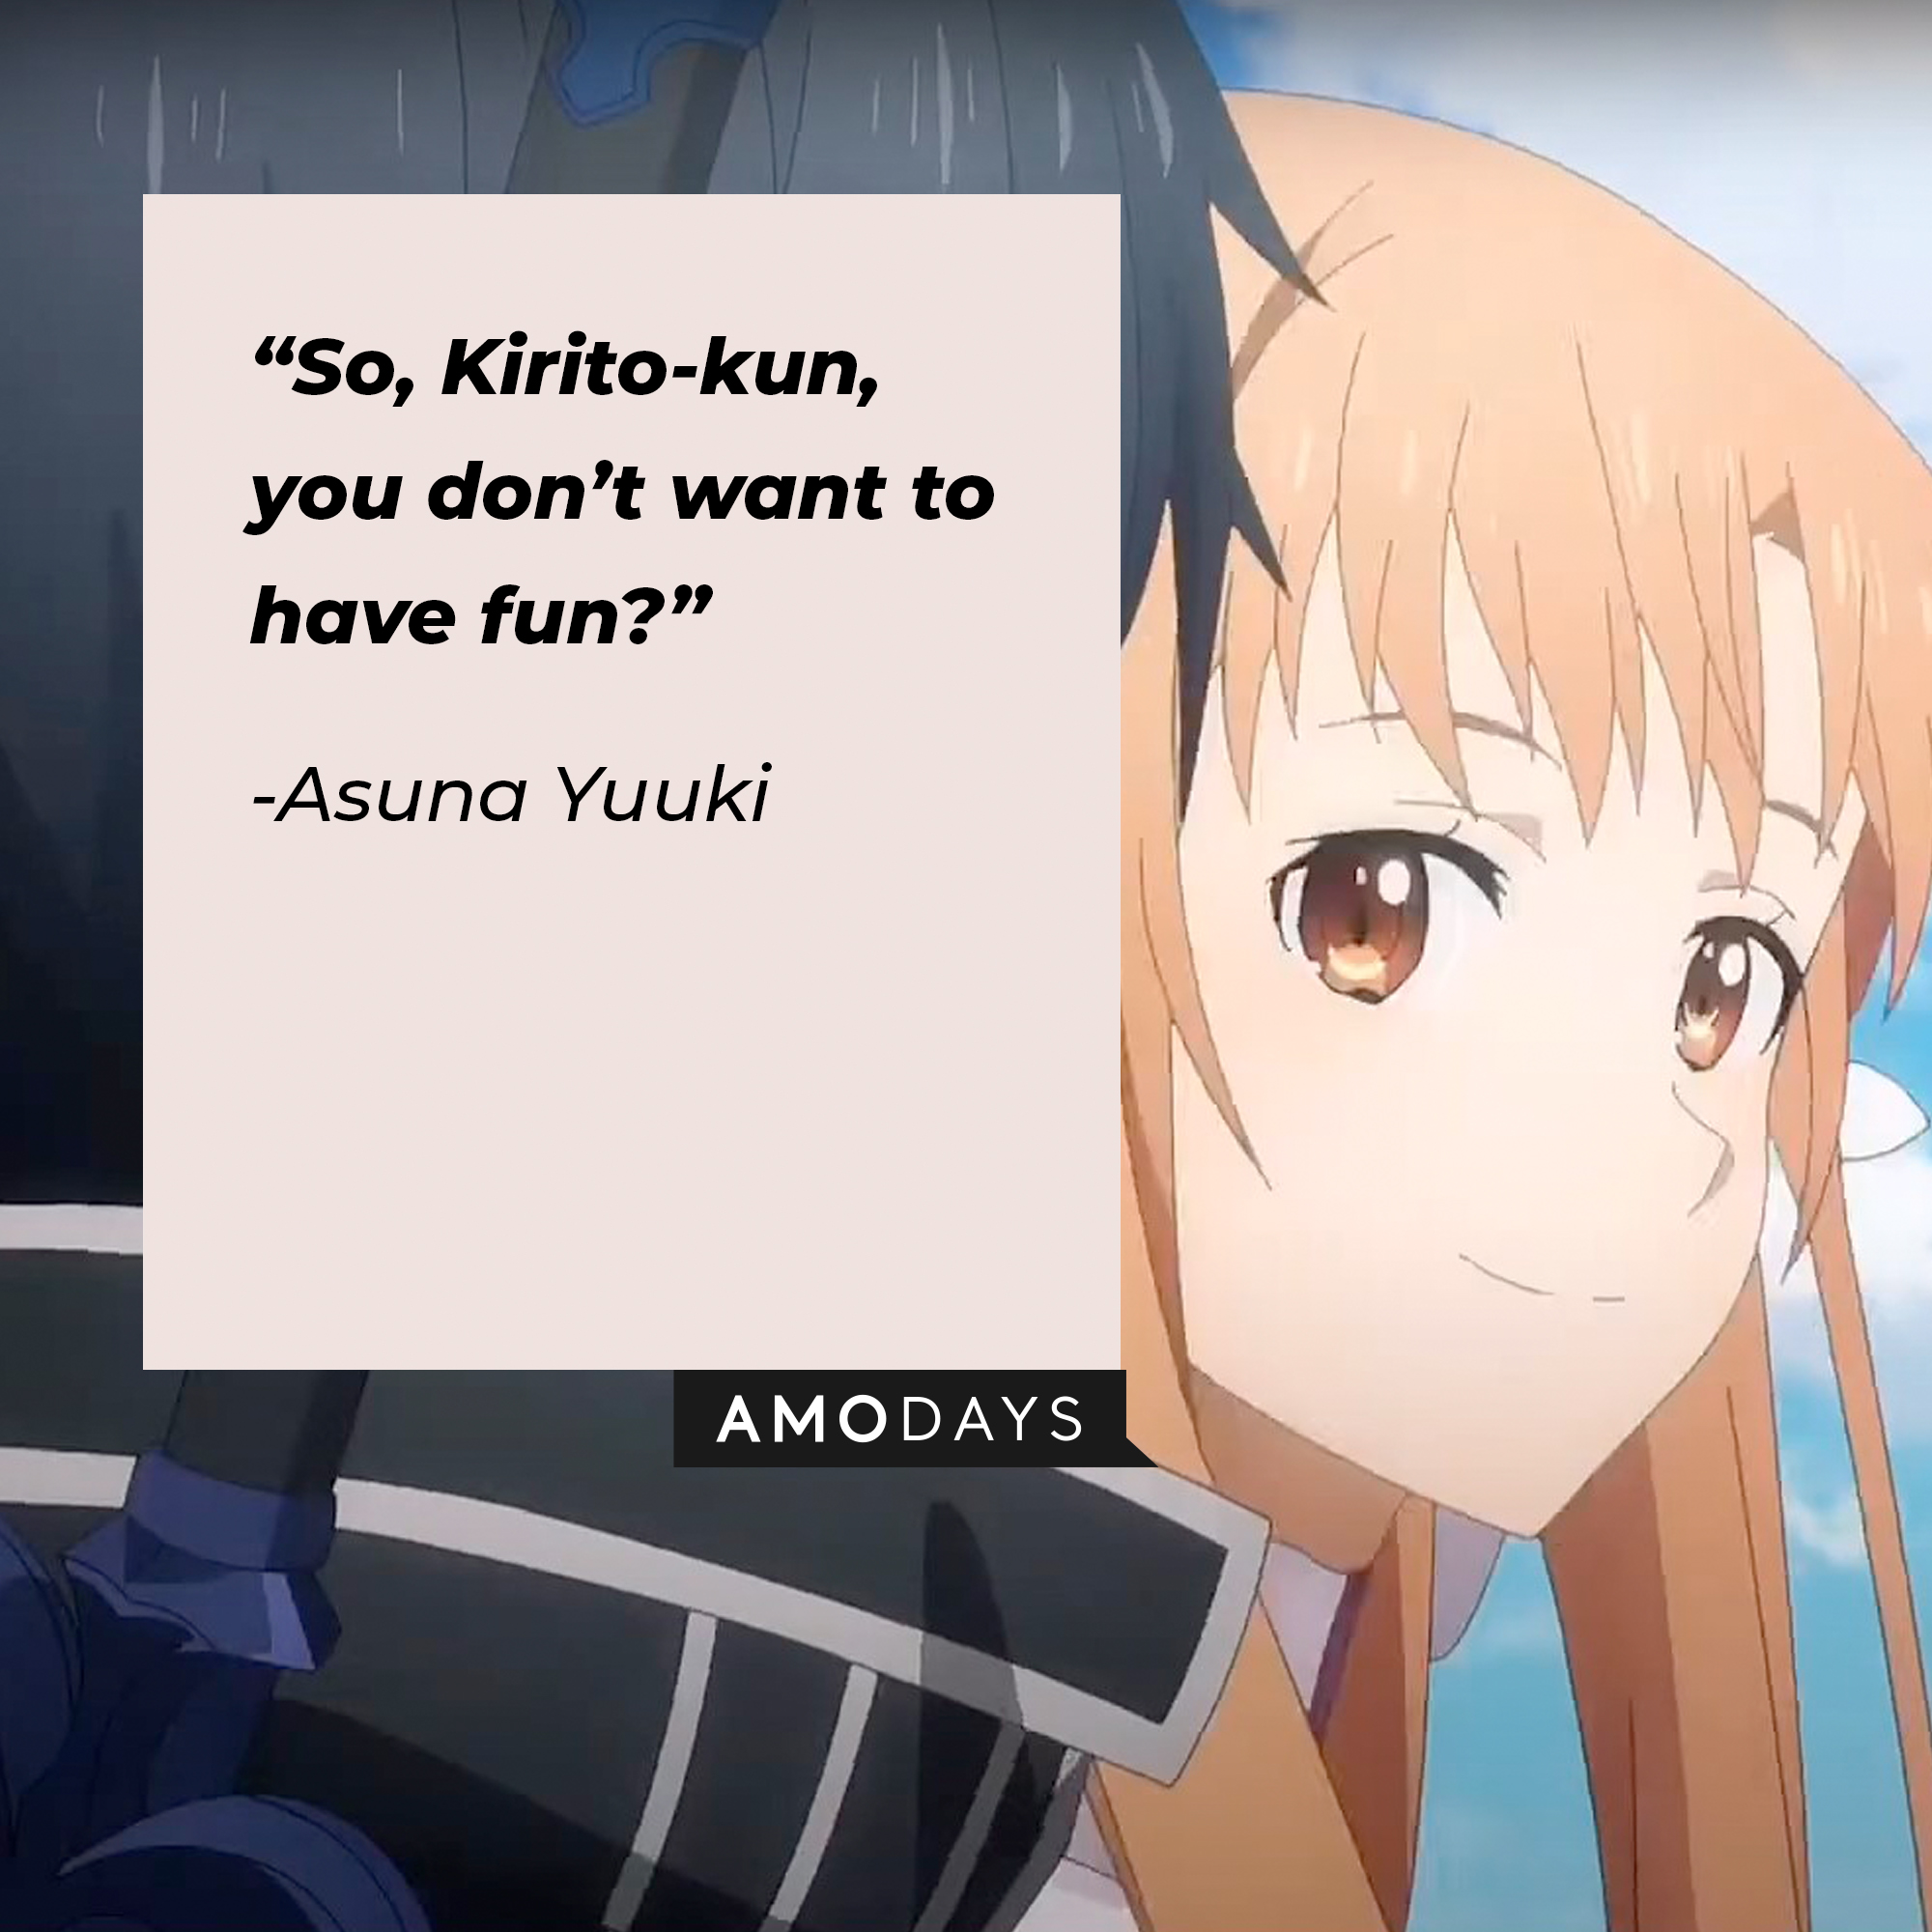 A picture of Asuna Yuuki with her quote: “So, Kirito-kun, you don’t want to have fun?” | Source: facebook.com/SwordArtOnlineUSA